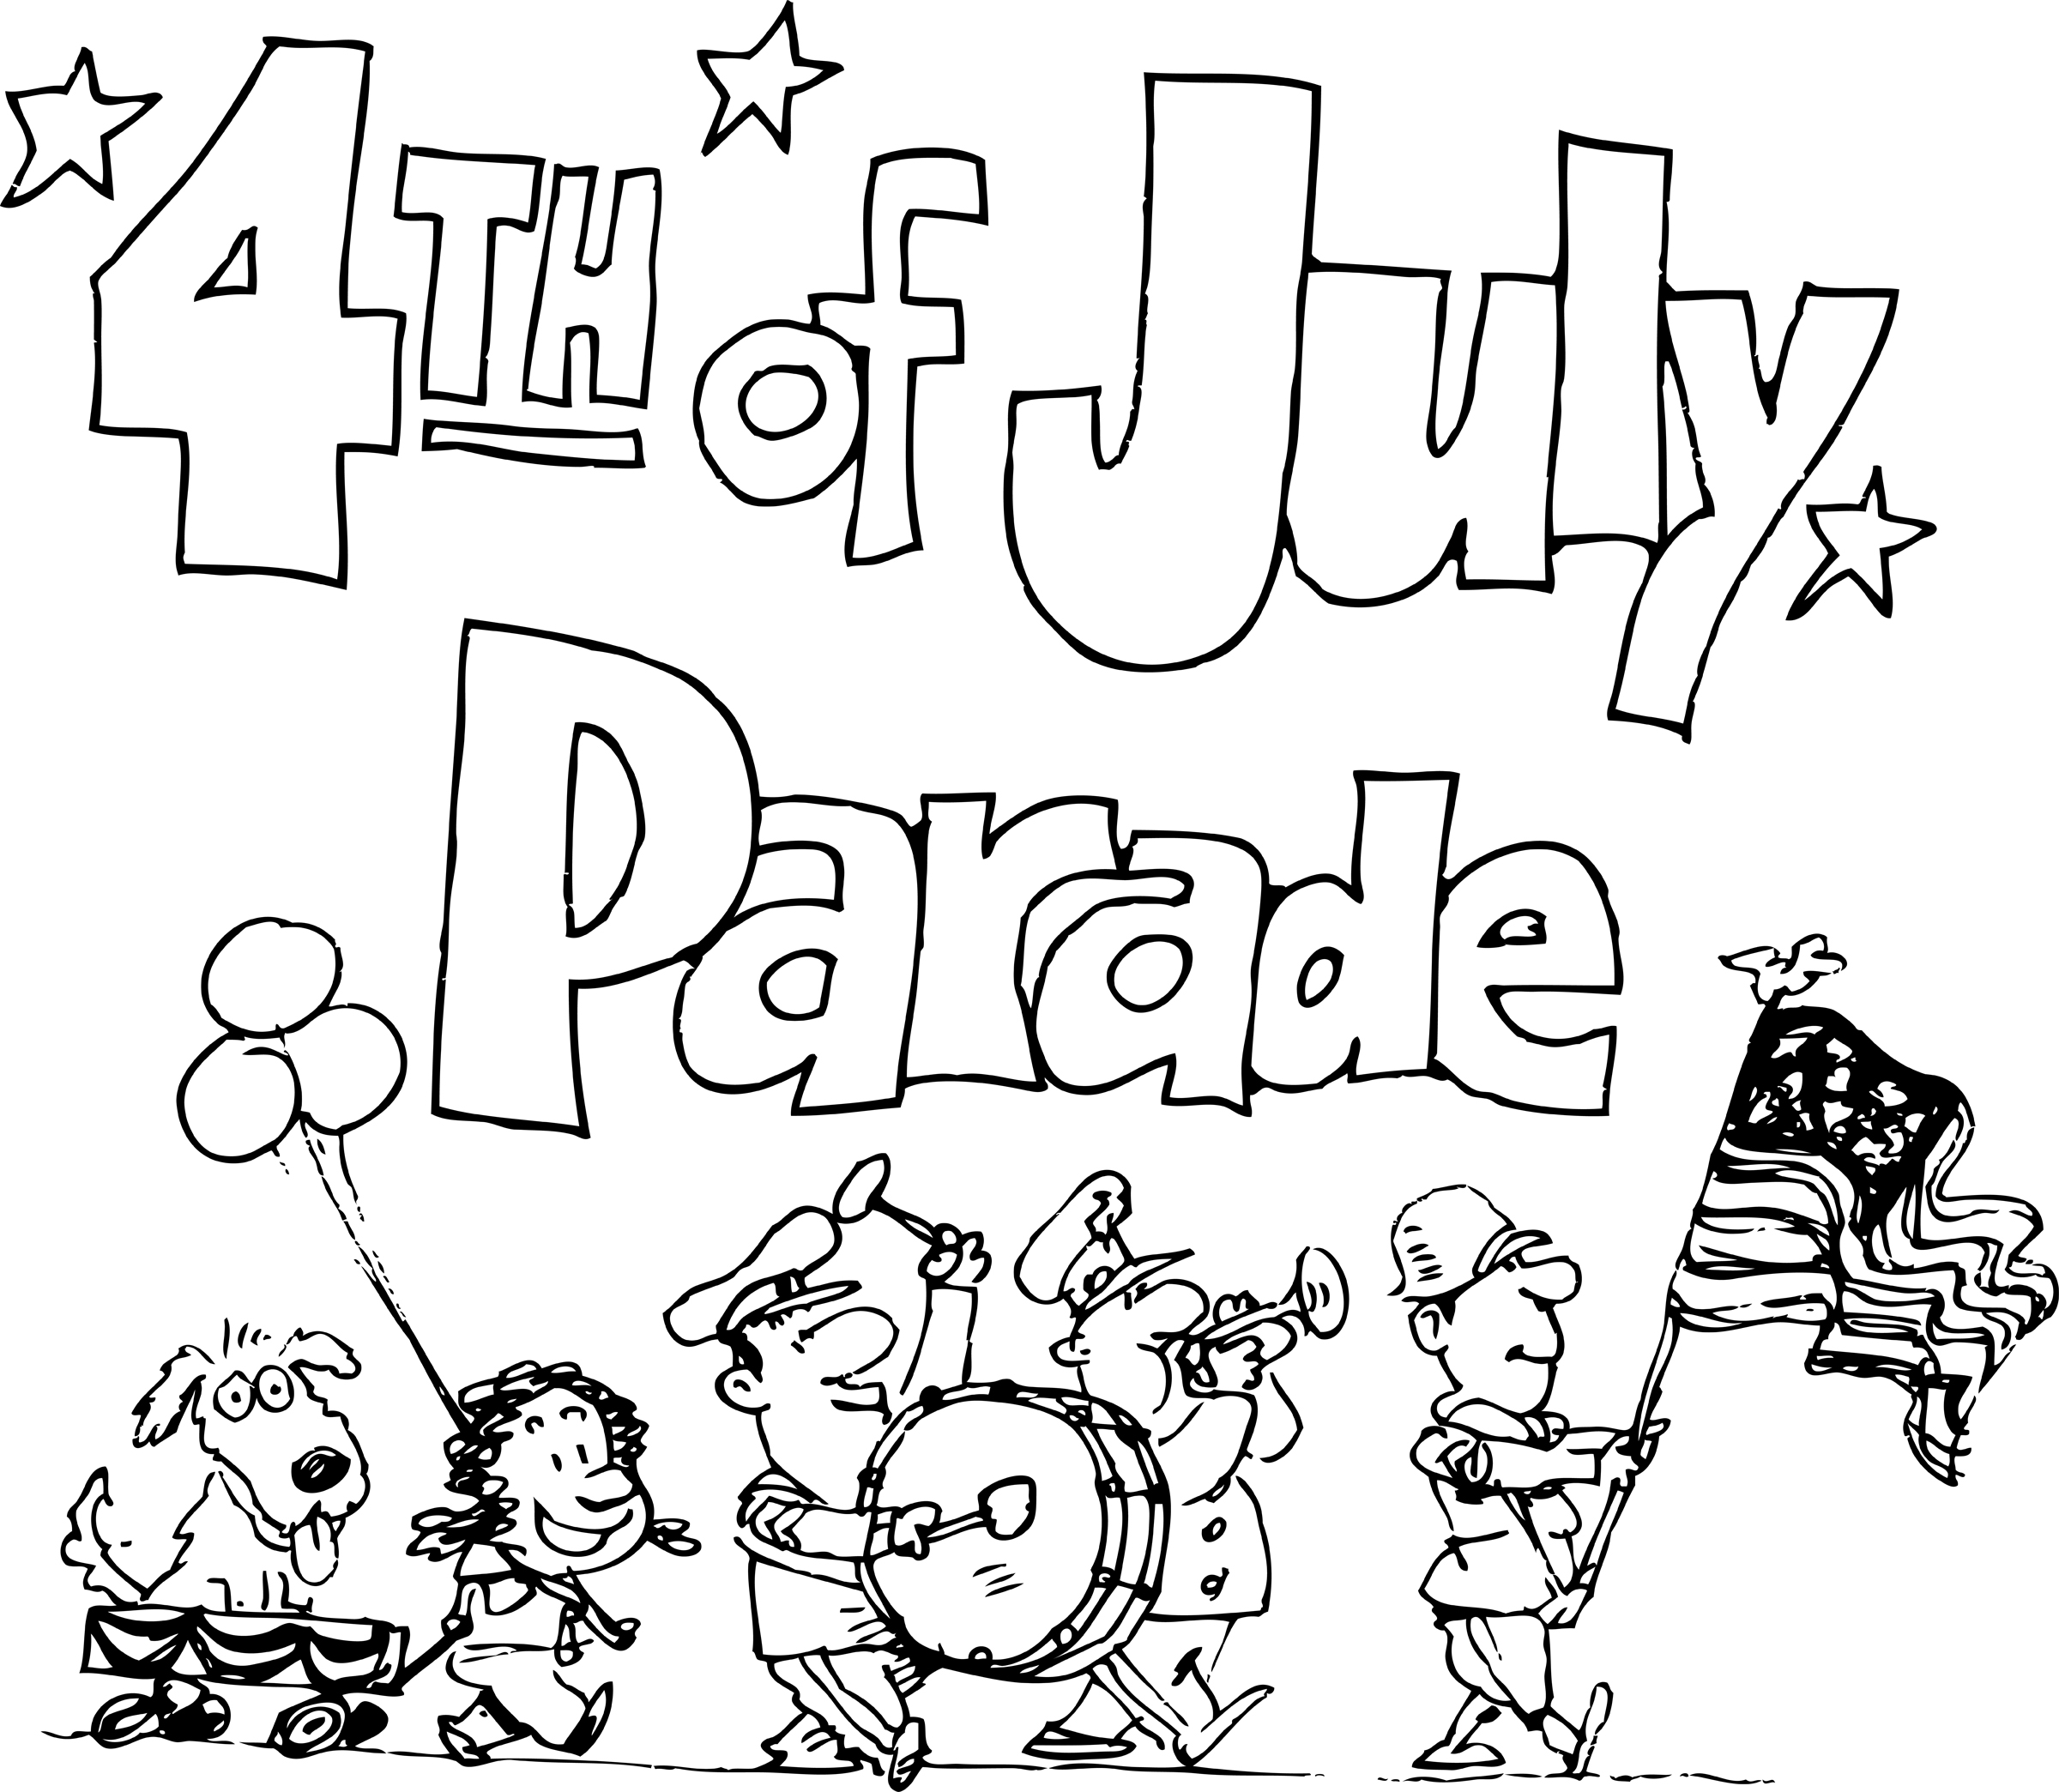 July 4th Parades Coloring Page